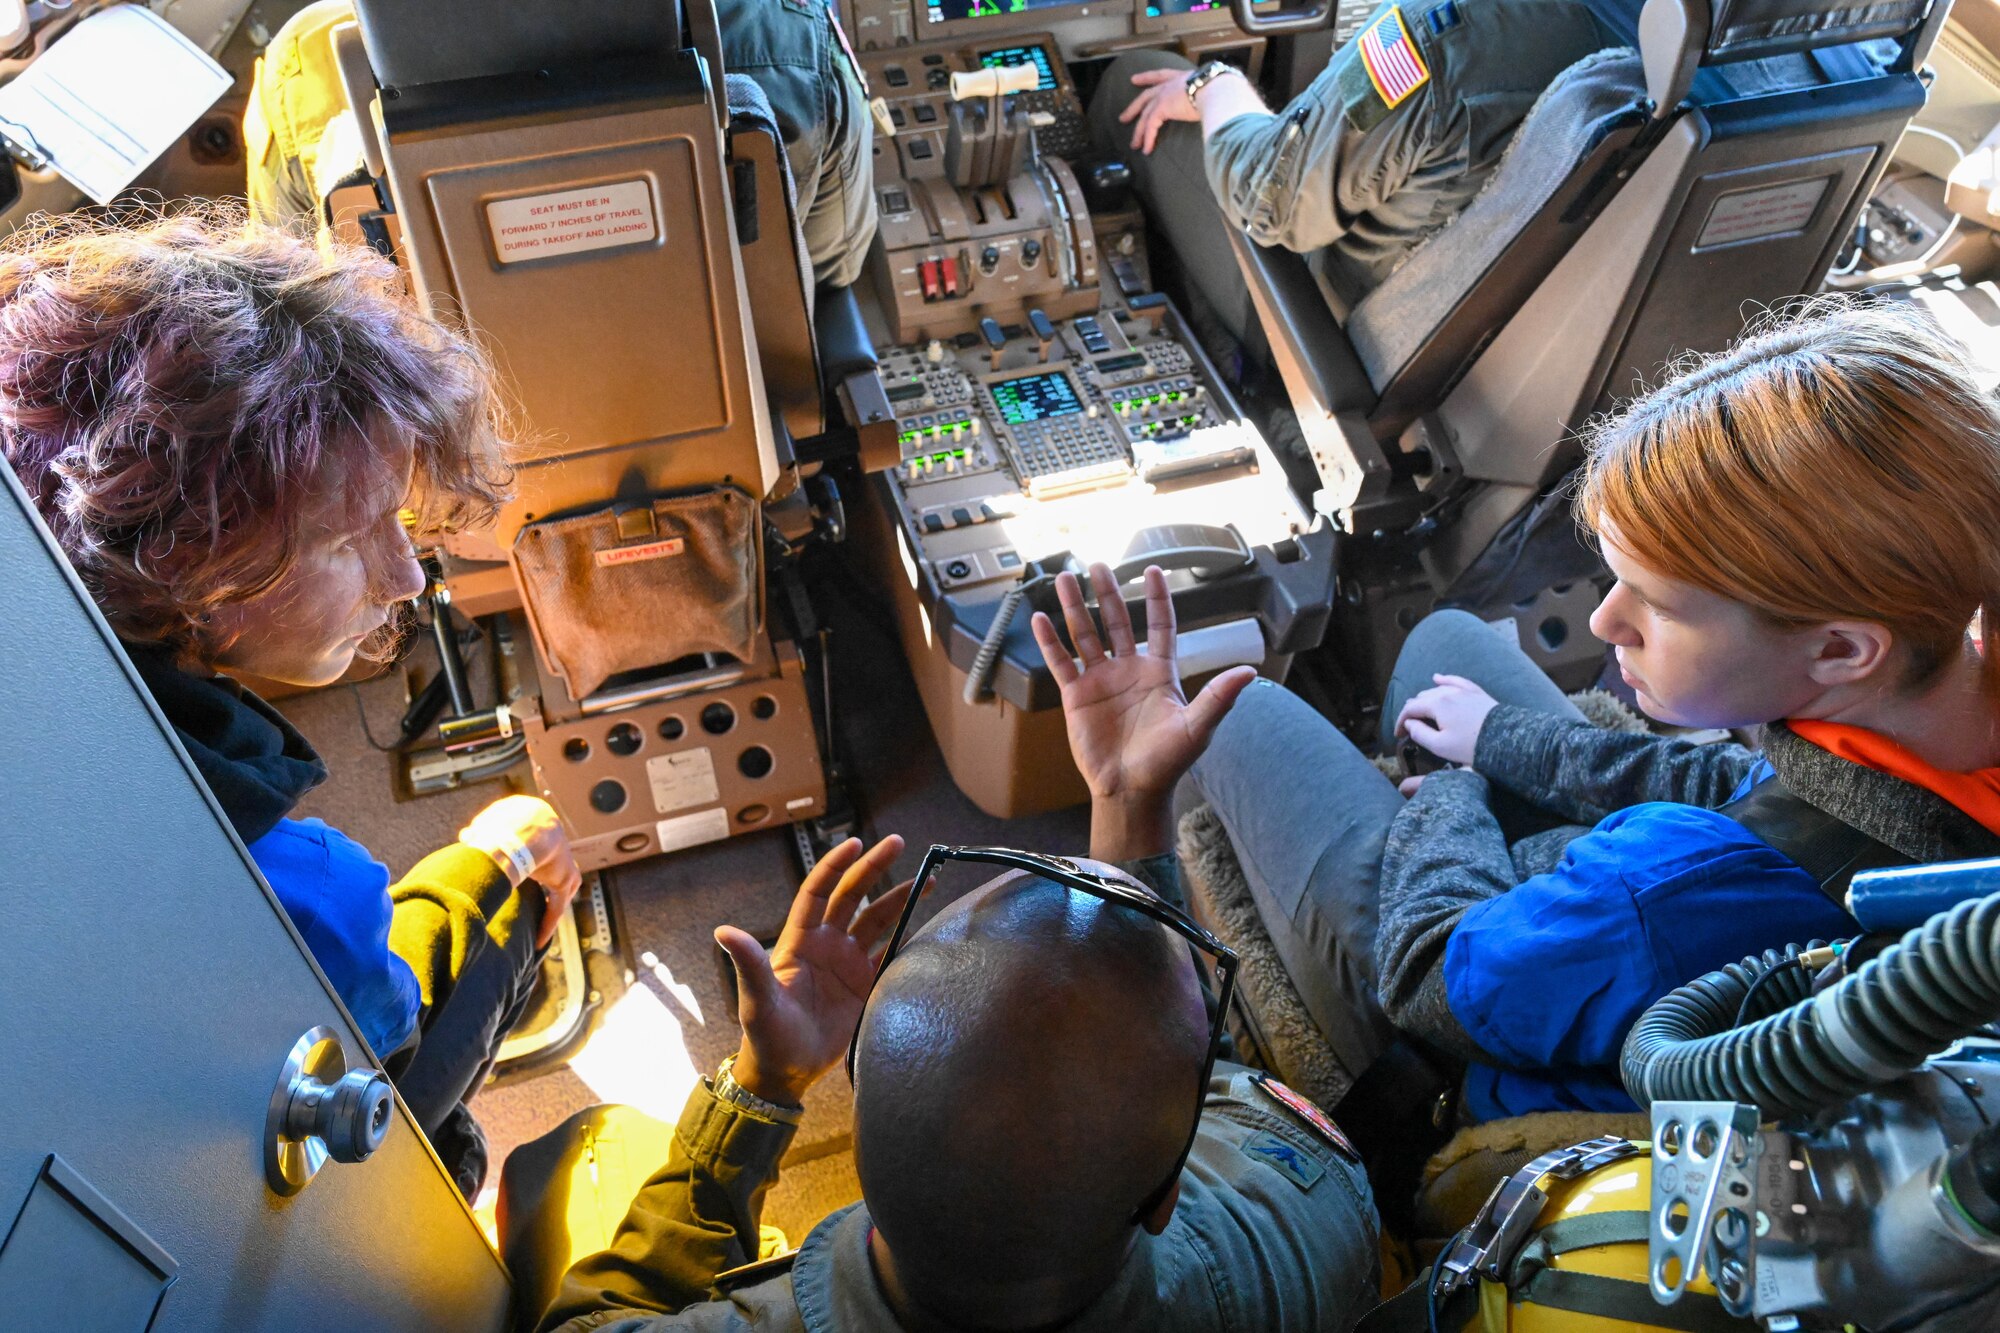 U.S. Air Force Col. Patrick Brady-Lee, 97th Air Mobility Wing vice commander, explains different controls in the cockpit of a KC-46 Pegasus to Legacy Flight Academy students during Accelerating the Legacy 2023 at Joint Base Charleston, South Carolina, Feb. 18, 2023. The Legacy Flight Academy co-hosted the third day of Accelerating the Legacy, allowing local students to interact with Airmen and learn more about aerospace-focused military careers. (U.S. Air Force photo by Senior Airman Trenton Jancze)